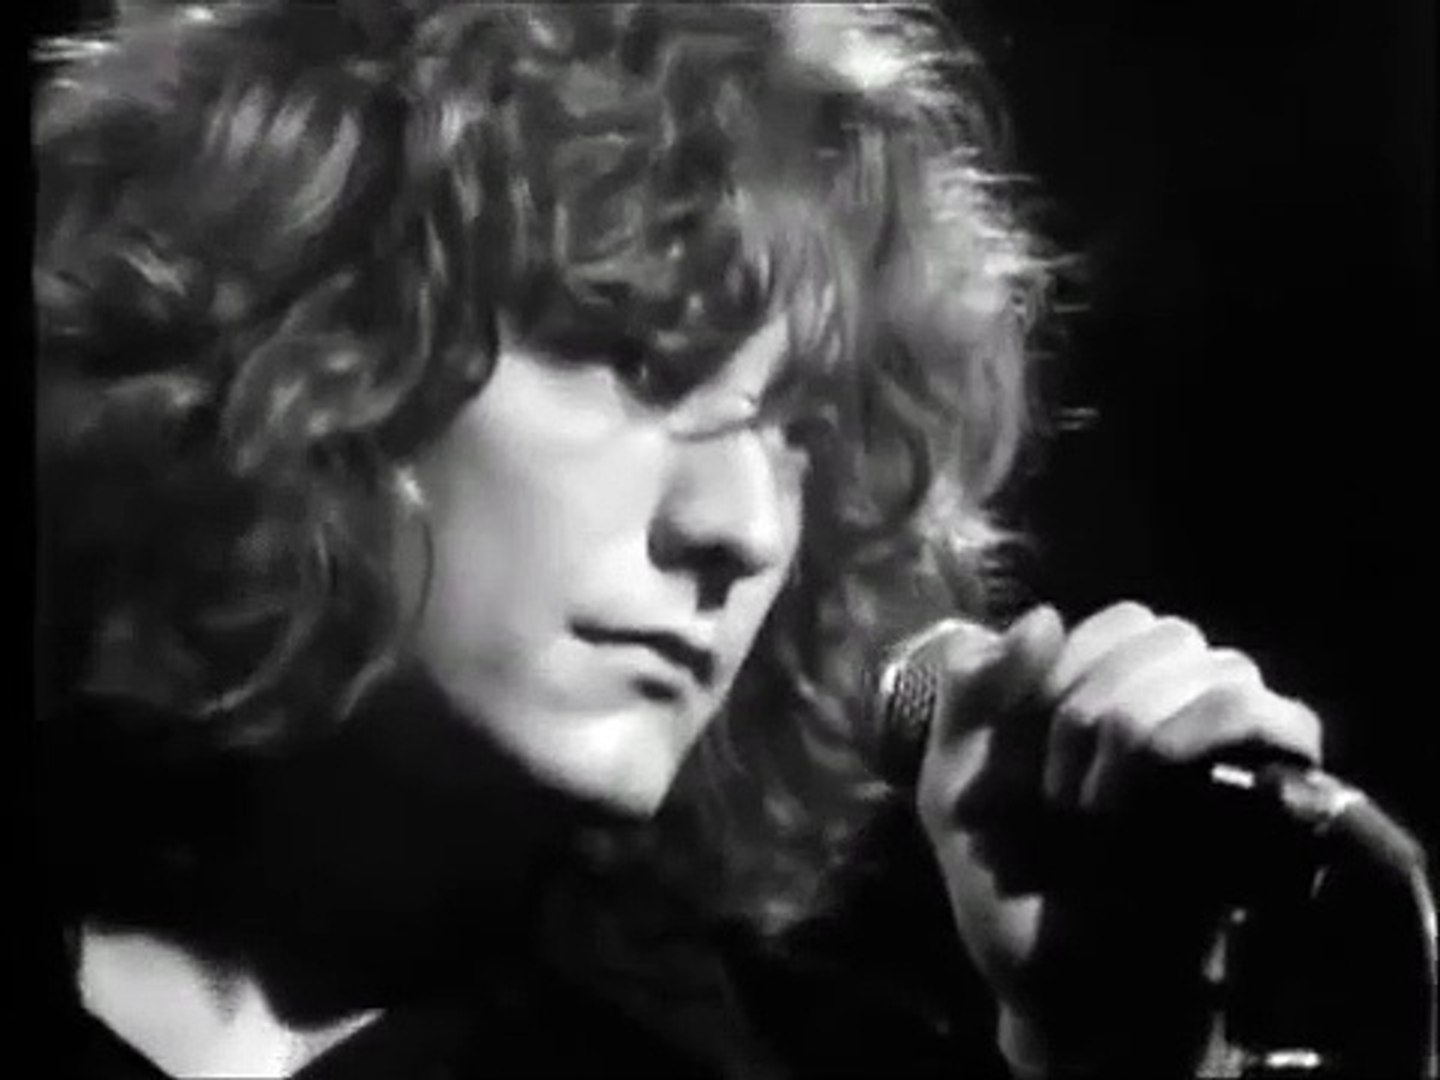 Led Zeppelin - Babe, I'm gonna leave you 03-17-1969 - Video Dailymotion